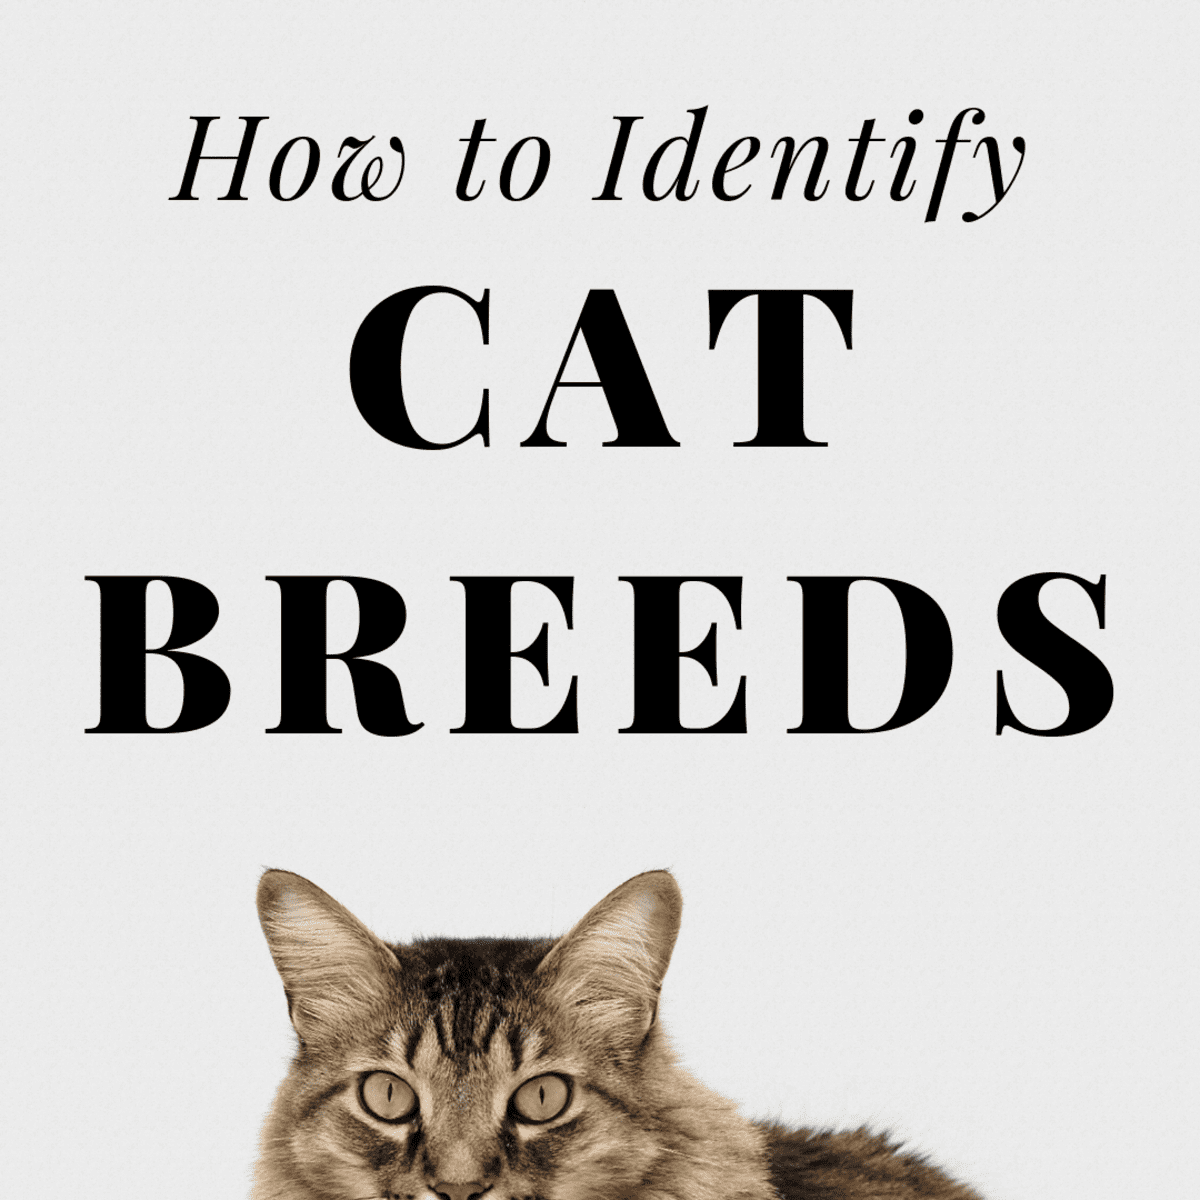 How to Identify Cat Breeds: From Ear Tufts to Fluffy Tails - PetHelpful